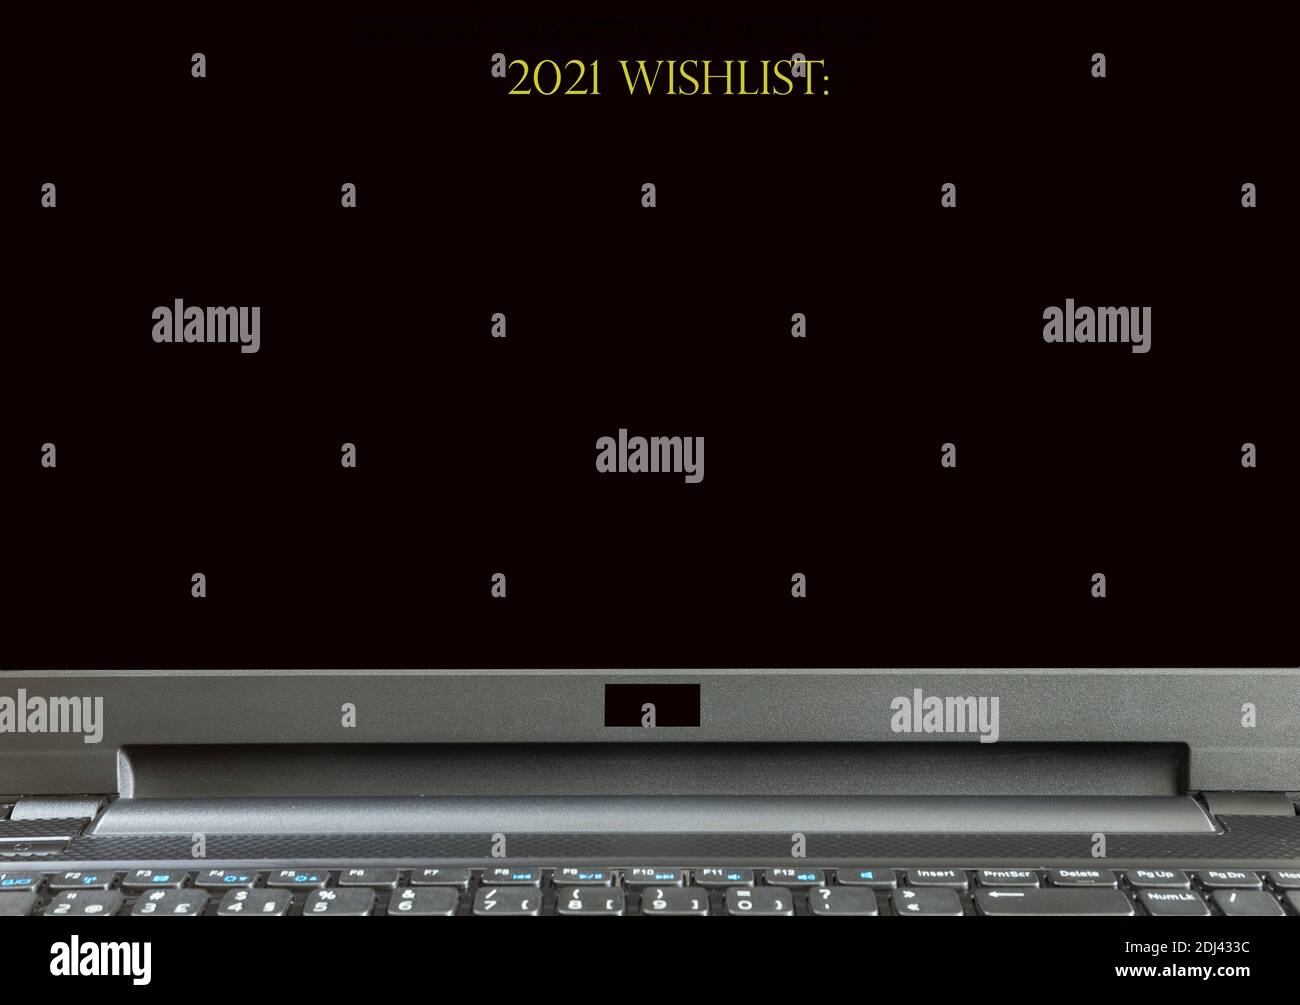 2021 wishlist. Laptop screen displaying 2021 wishlist in golden colored text. 2021 wish list. With copy space. Stock Photo